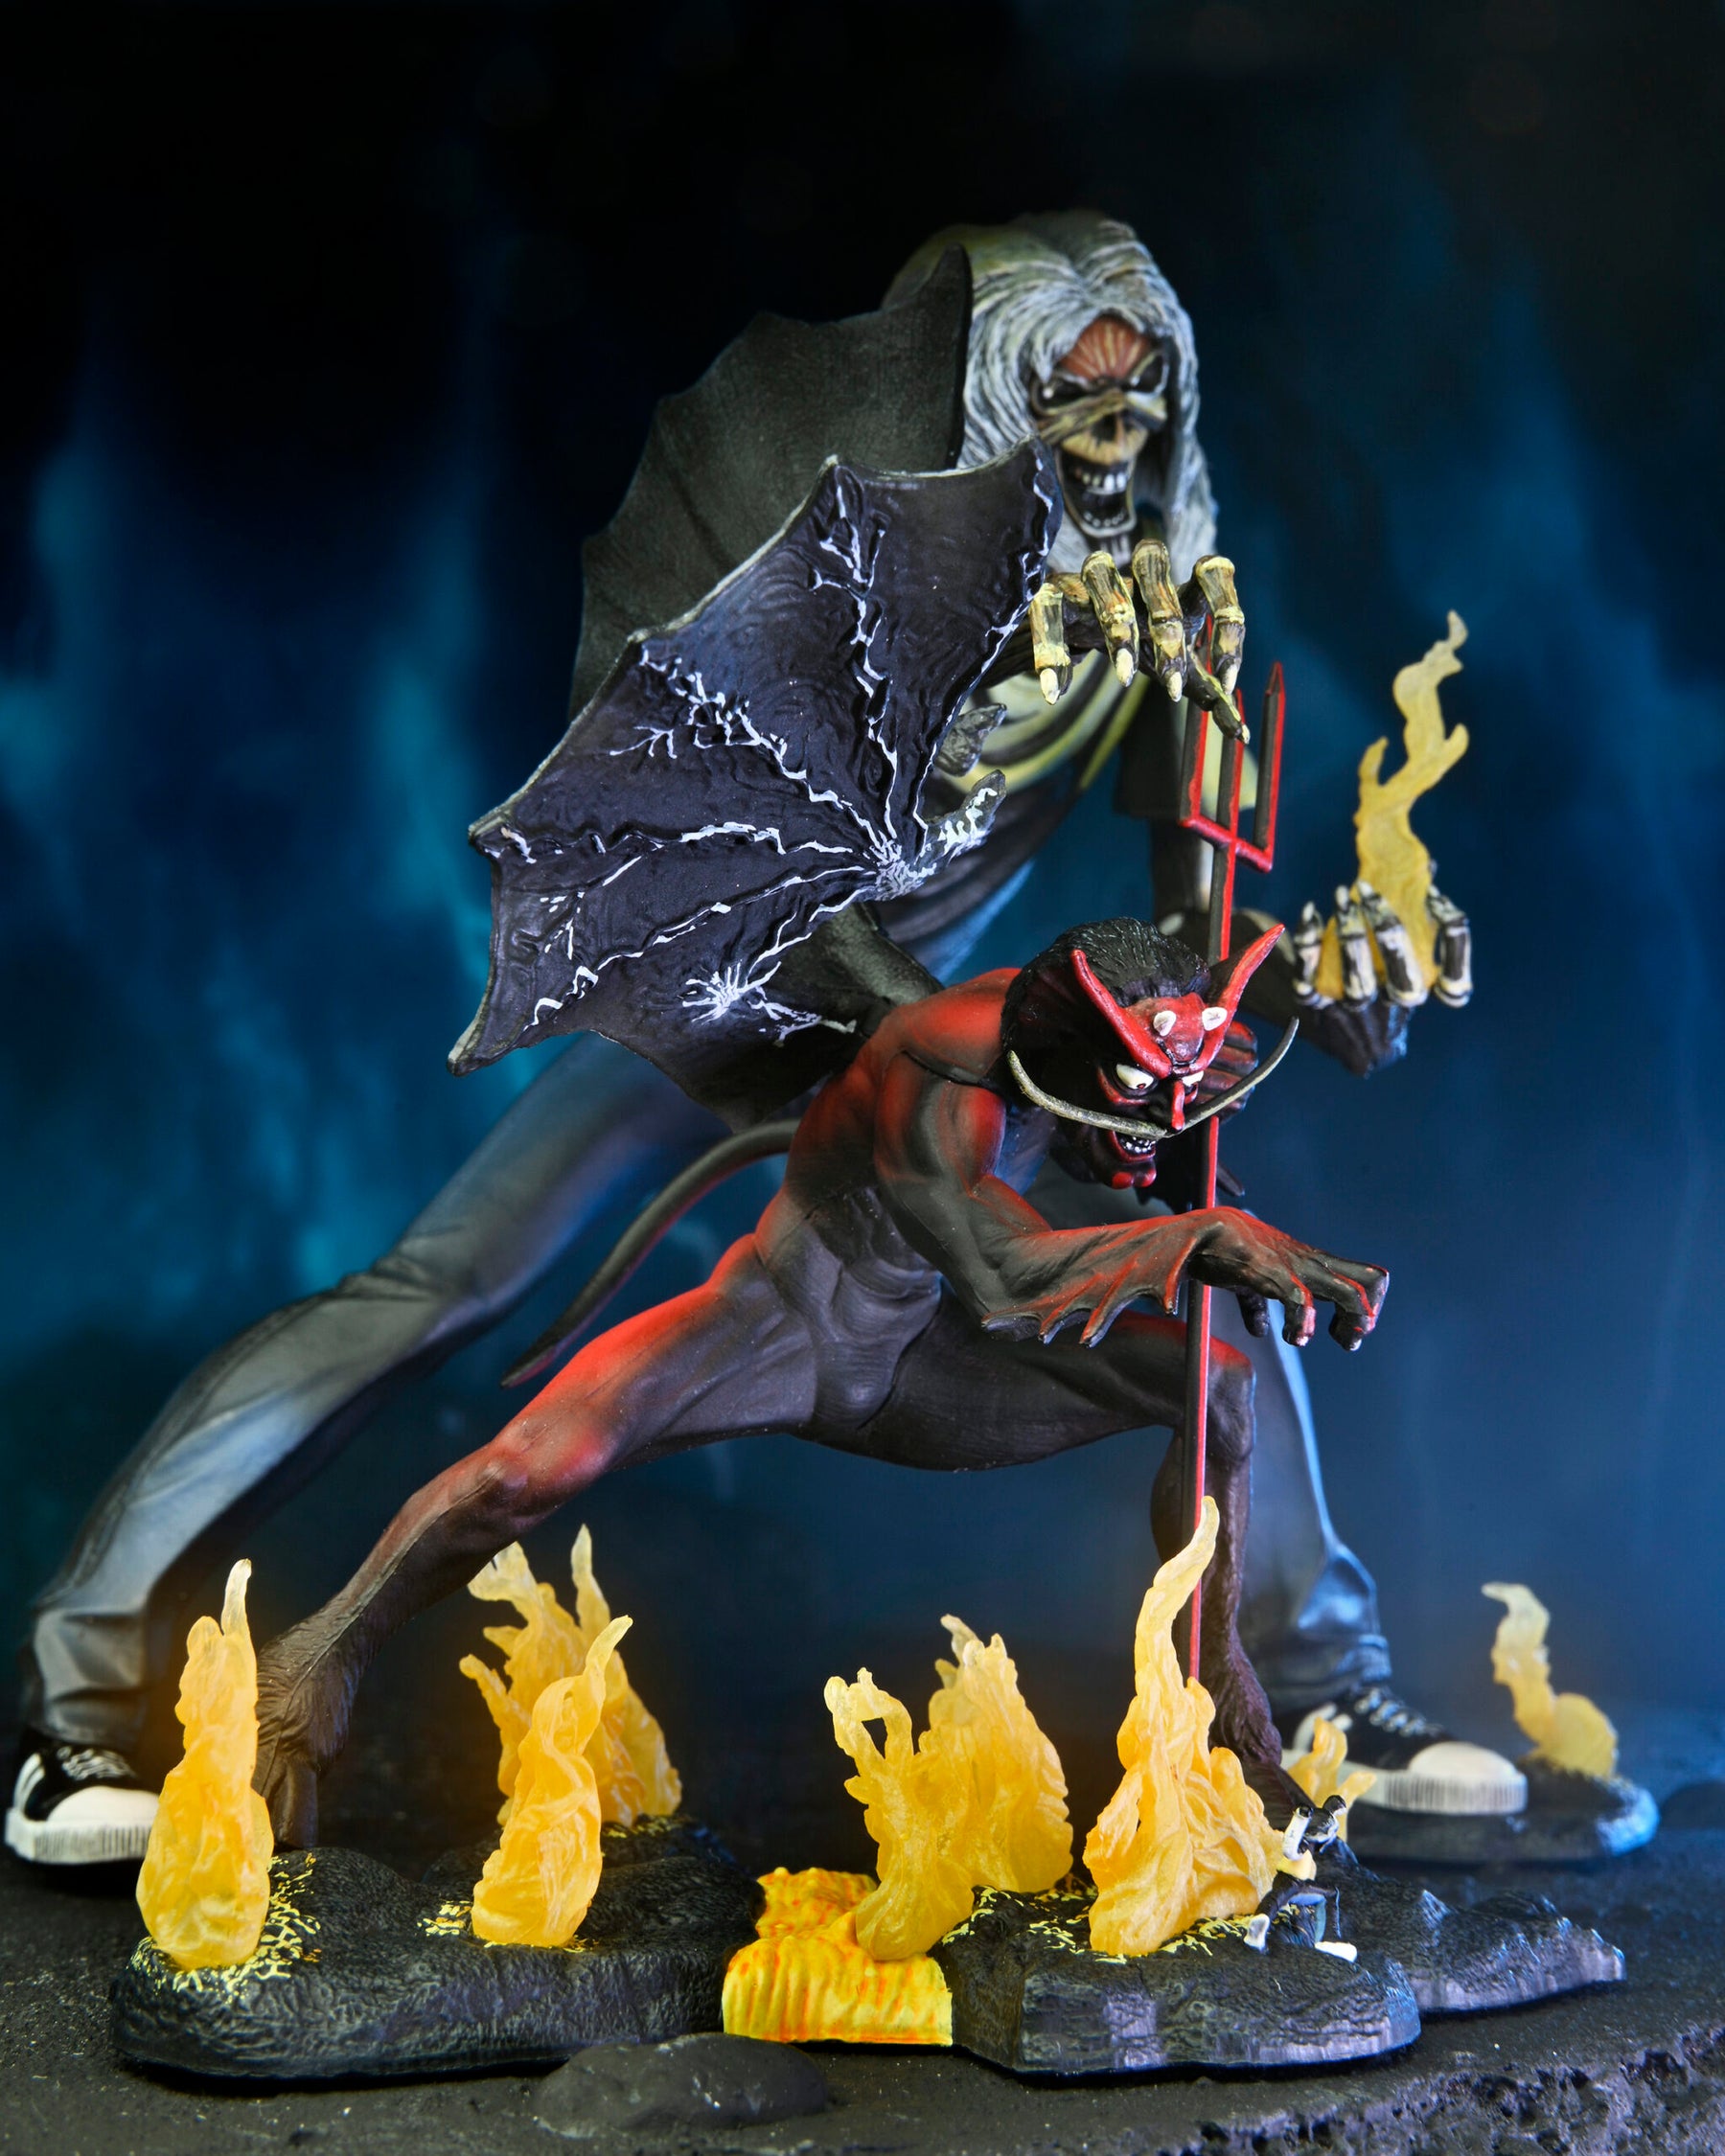 NECA - Iron Maiden - Ultimate Number of the Beast (40th Anniversary) 7” Action Figure Set